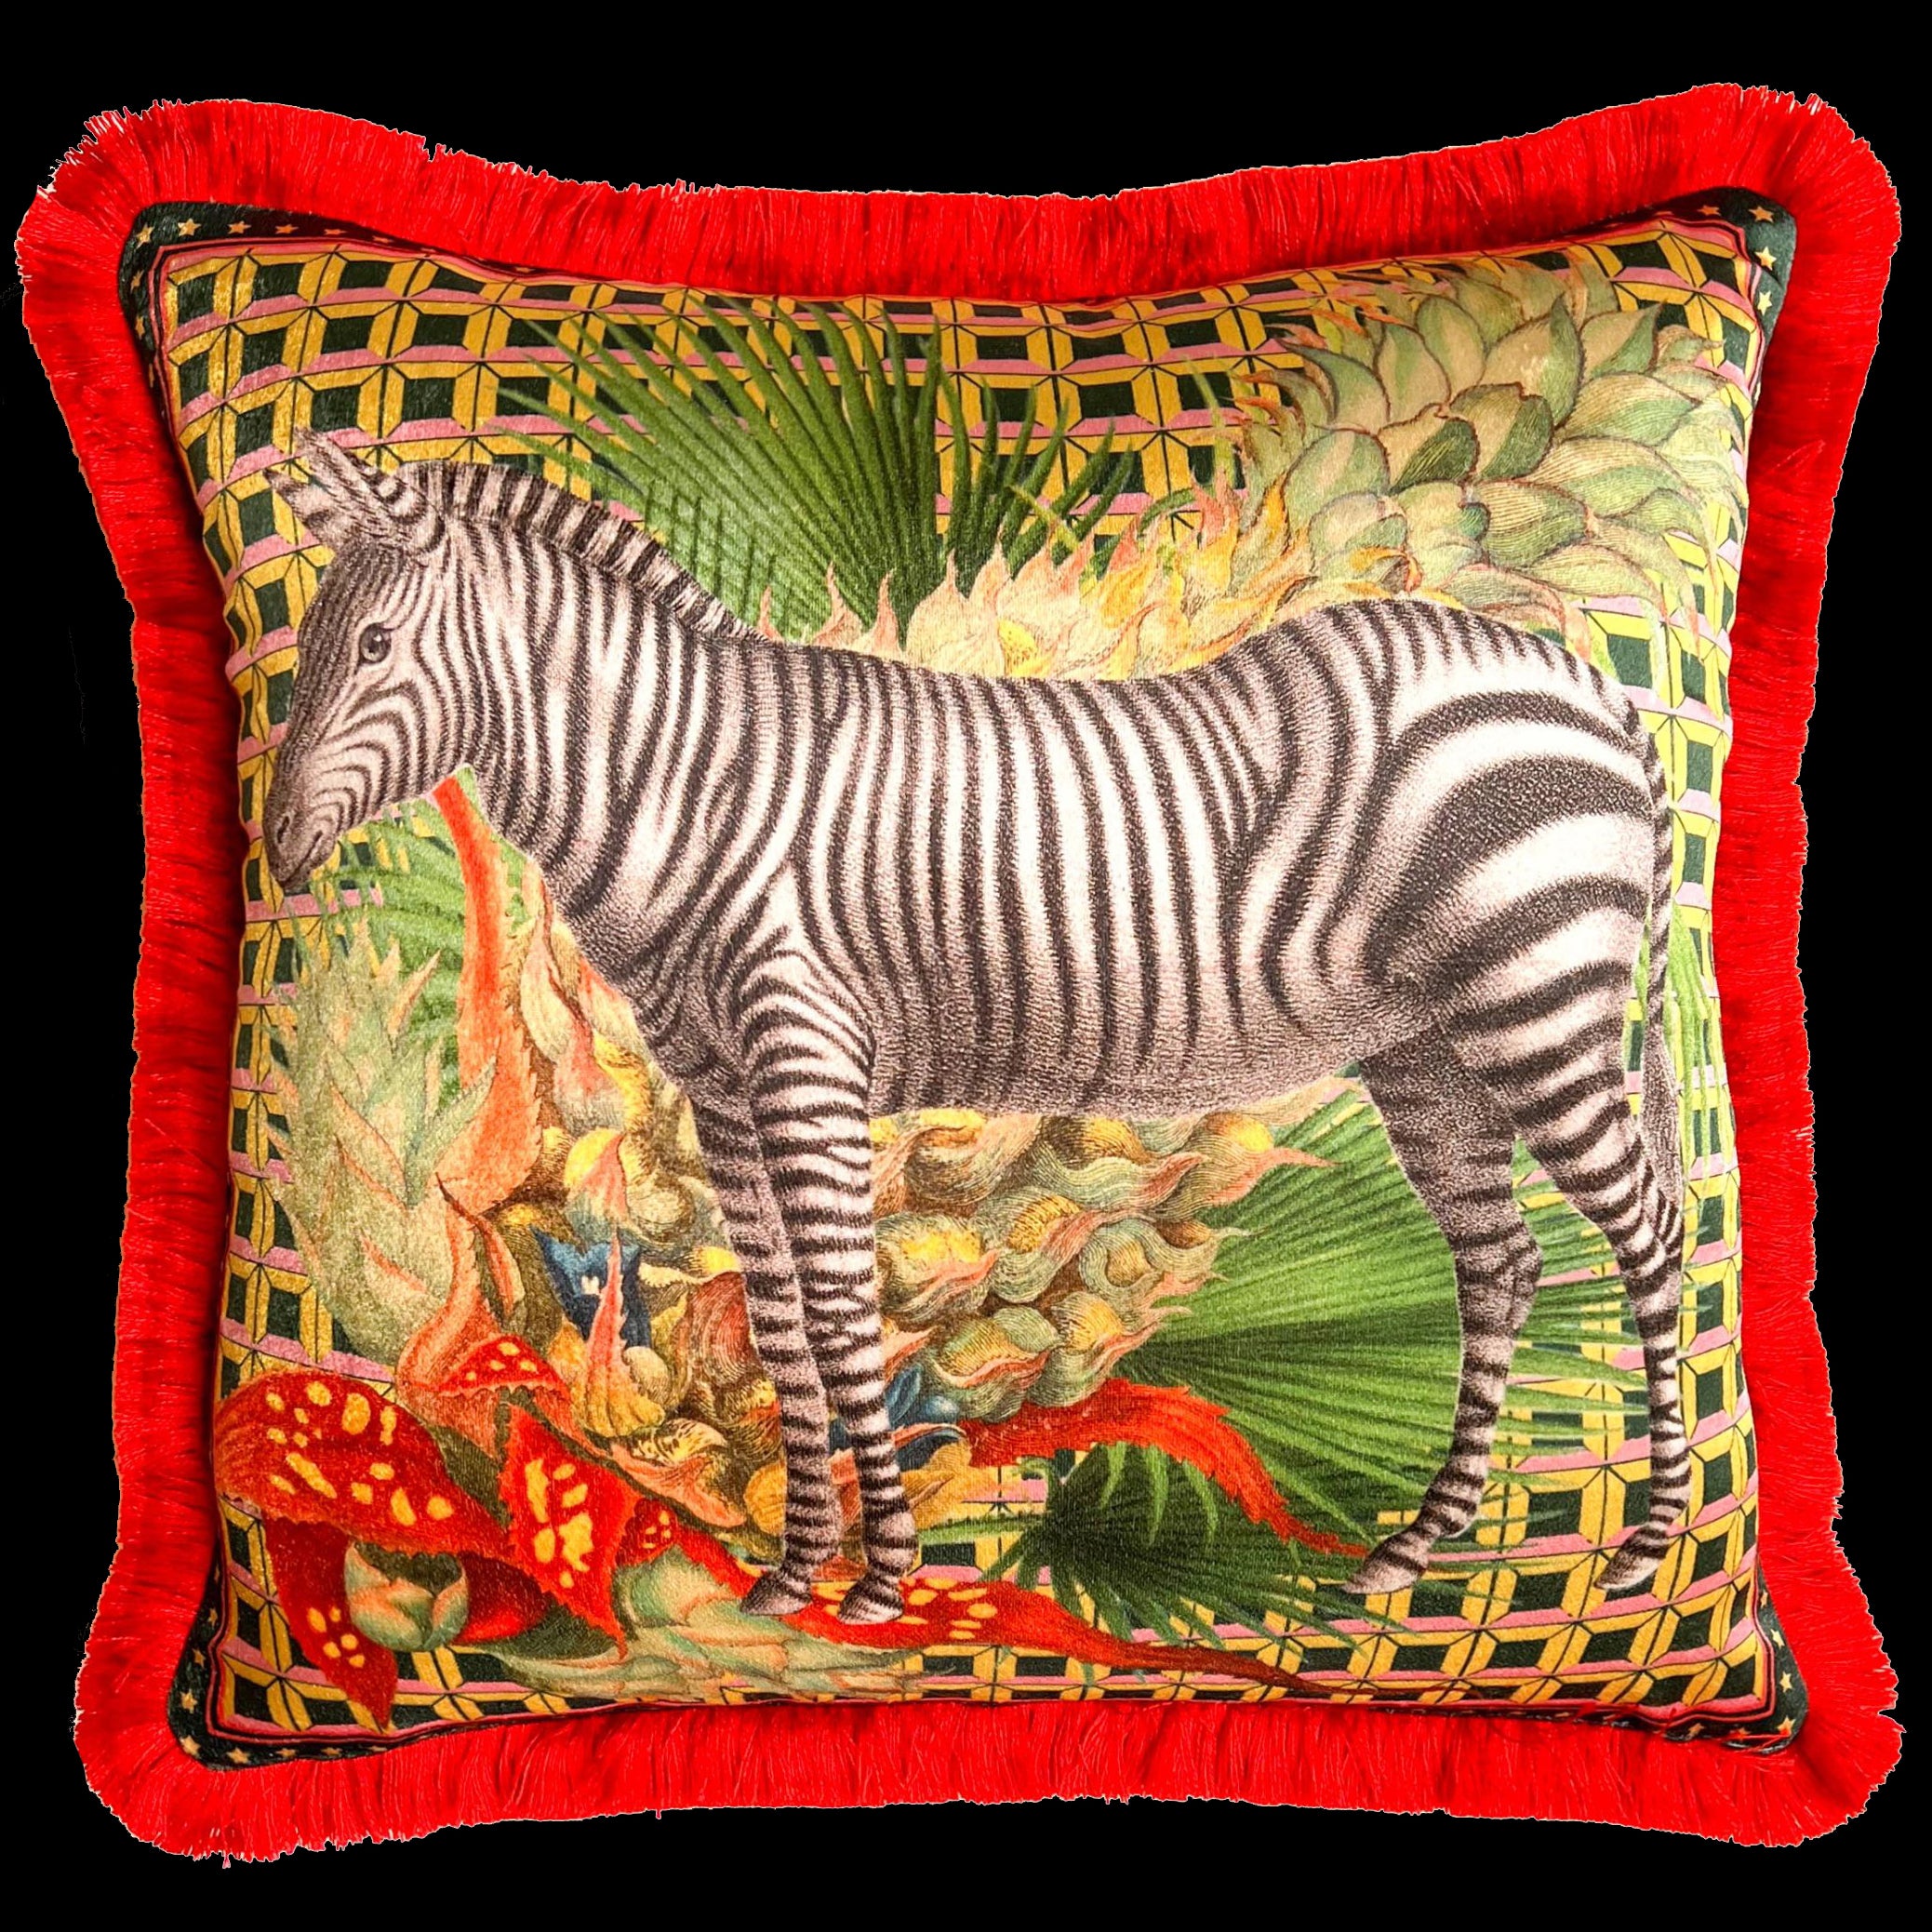 Front view of zebra cushion with colorful red, green, yellow and pink accents.